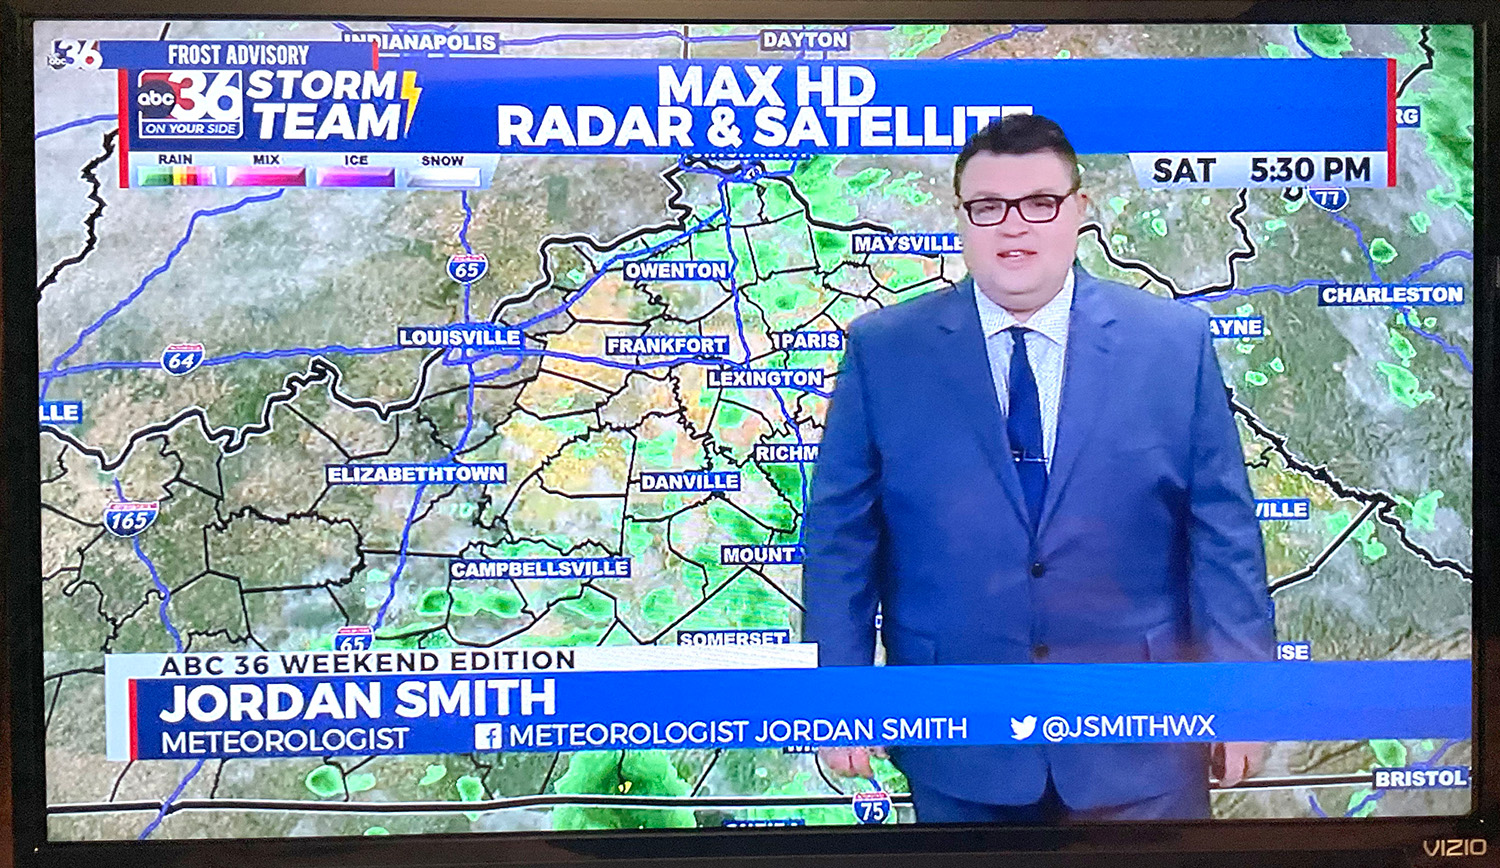 Jordan Smith sharing the weather on TV for WTVQ-TV